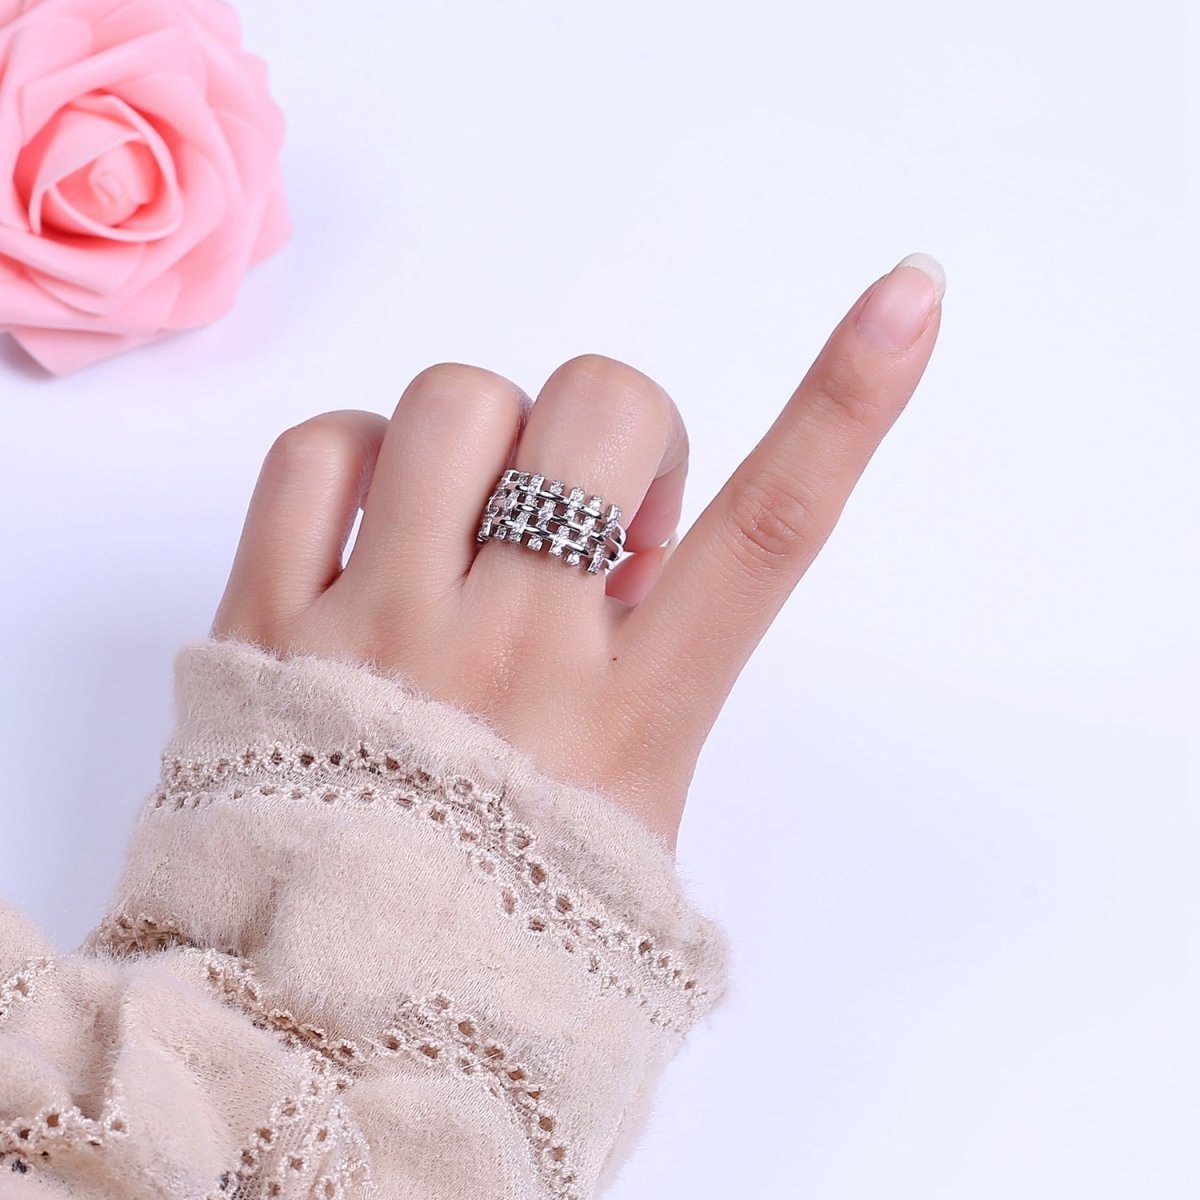 Big Cz Statement Ring in Gold / Silver Band for Statement Ring Midi Ring Adjustable S-475 S-476 - DLUXCA